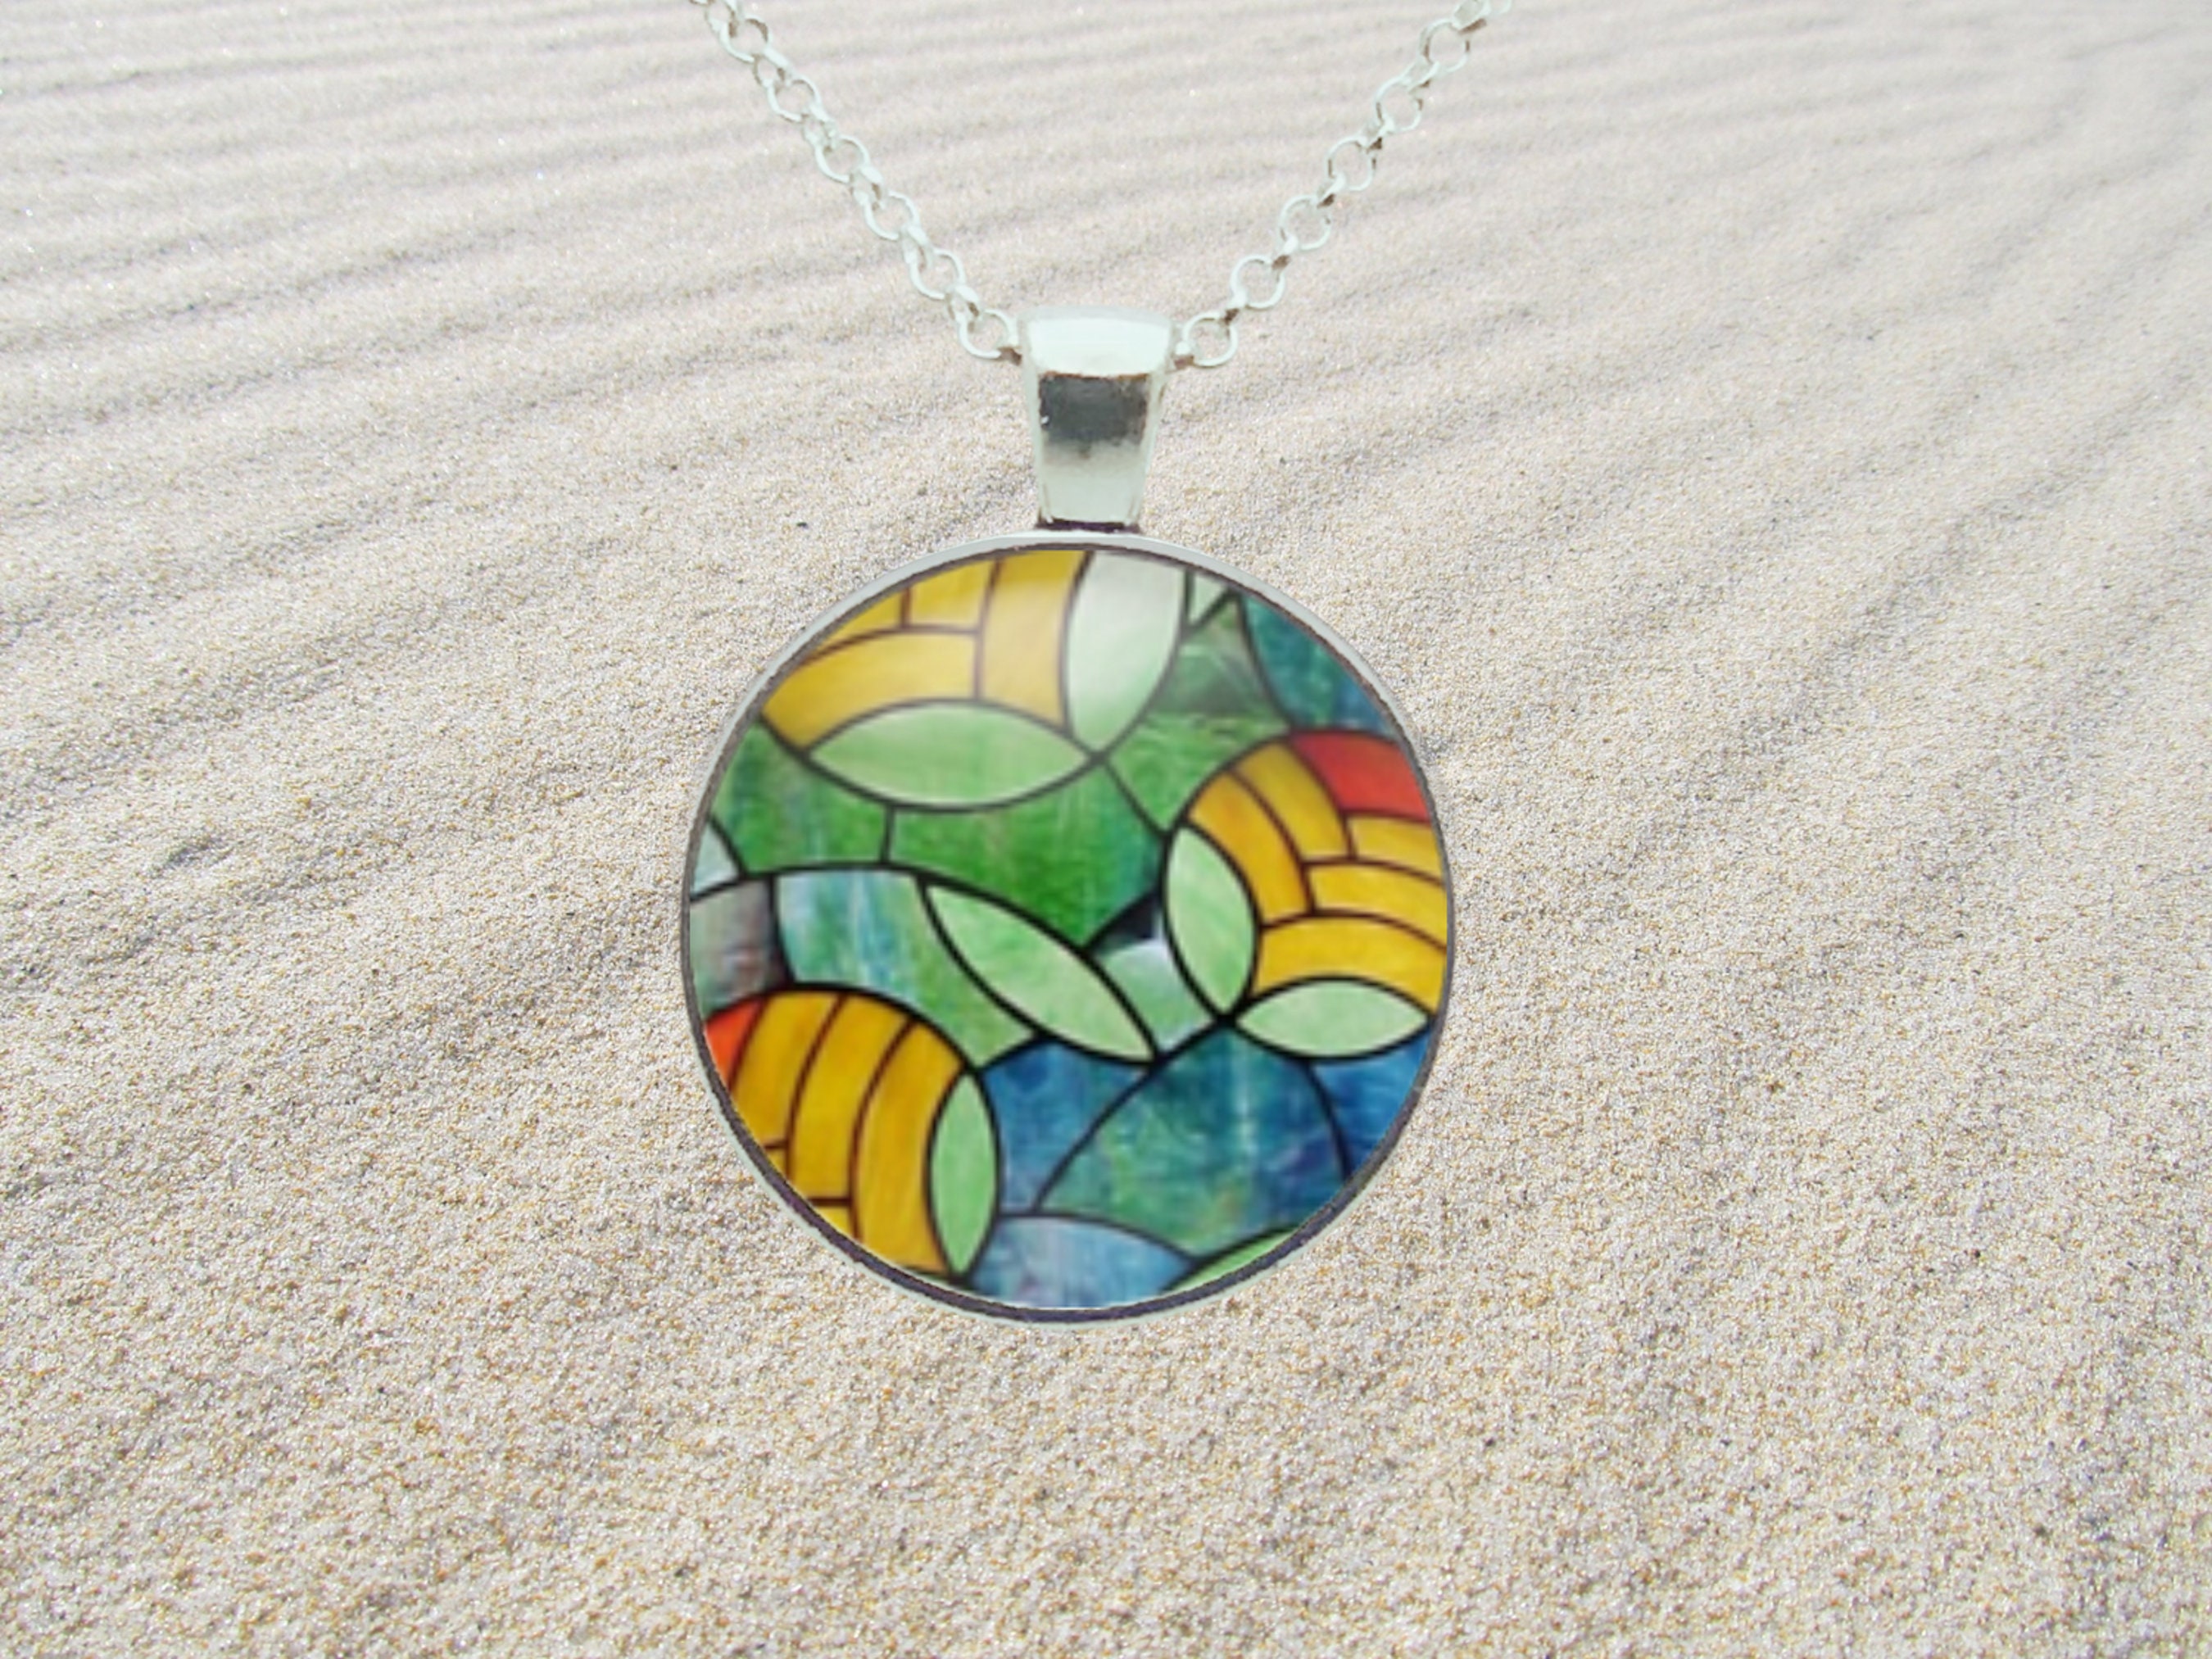 STAINED GLASS FLOWER Necklace Fused Blue Yellow Orange Red Big Tulip Gift  for Girlfriend Daughter Woman Mother Floral Pendant Nature Jewelry - Etsy | Stained  glass necklace, Stained glass crafts, Stained glass jewelry